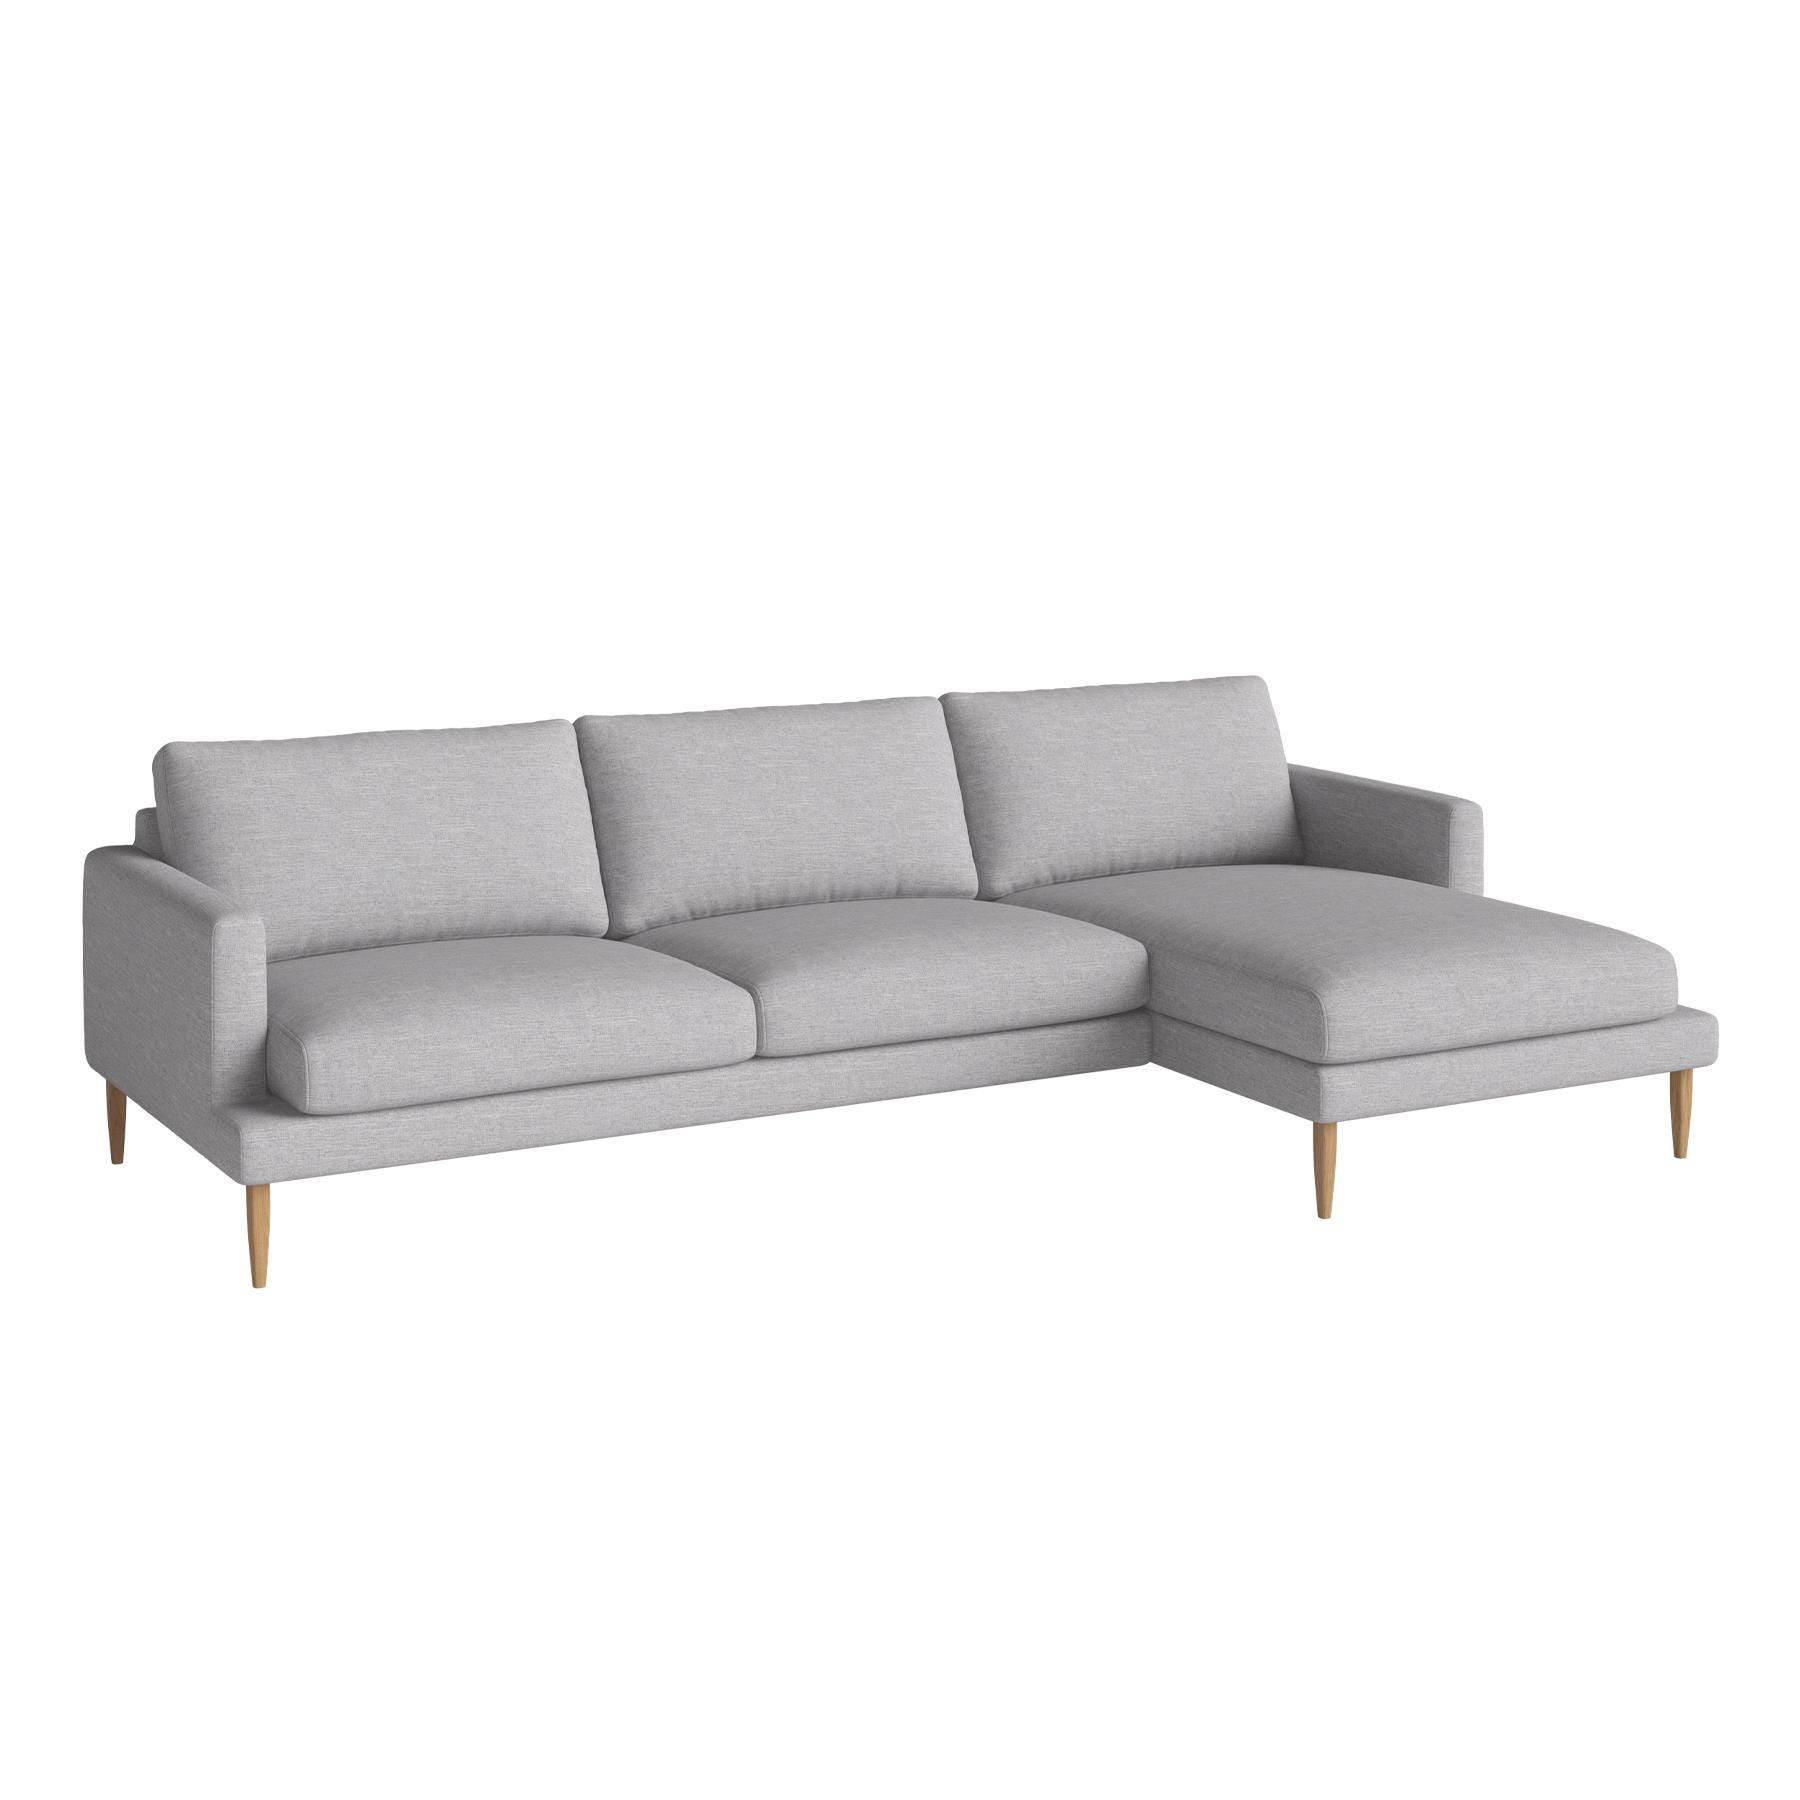 Bolia Veneda Sofa 35 Seater Sofa With Chaise Longue Oiled Oak Baize Light Grey Right Grey Designer Furniture From Holloways Of Ludlow